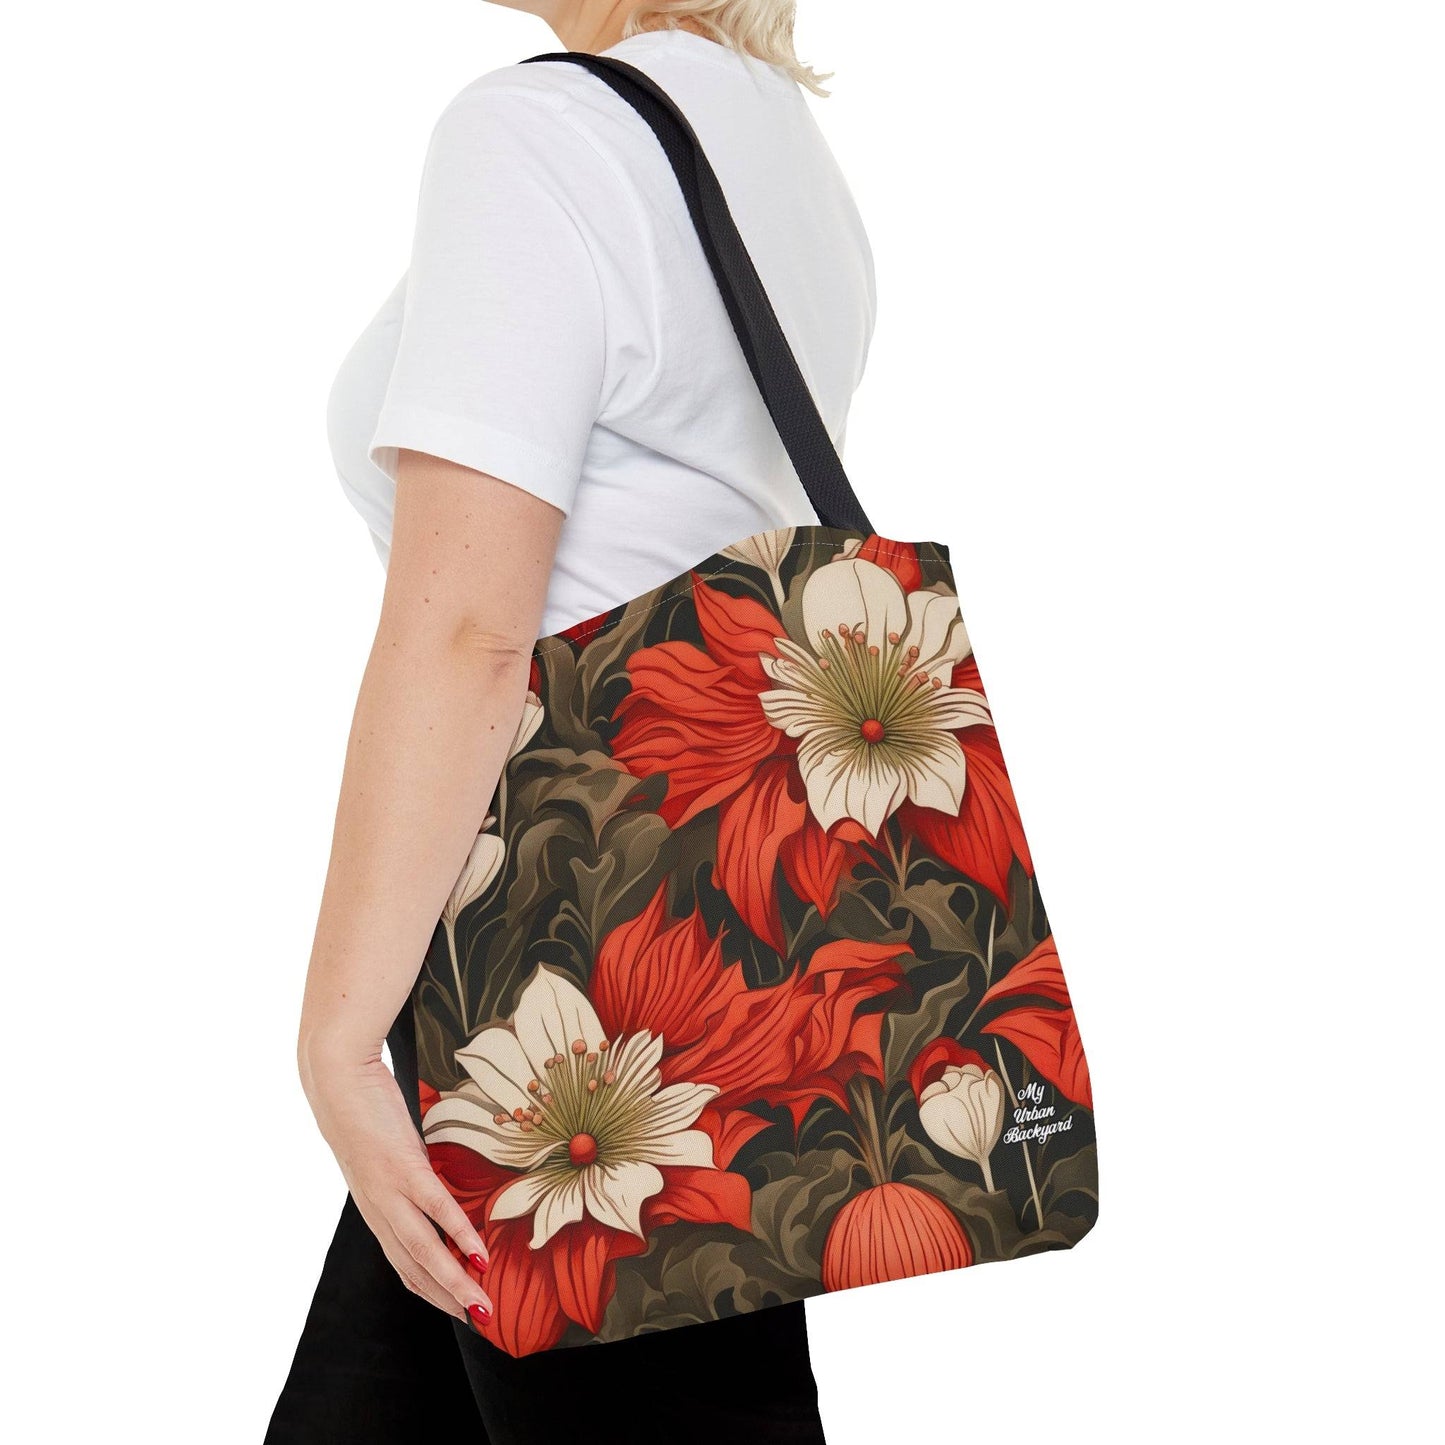 Everyday Tote Bag w Cotton Handles, Reusable Shoulder Bag, Holiday Flowers